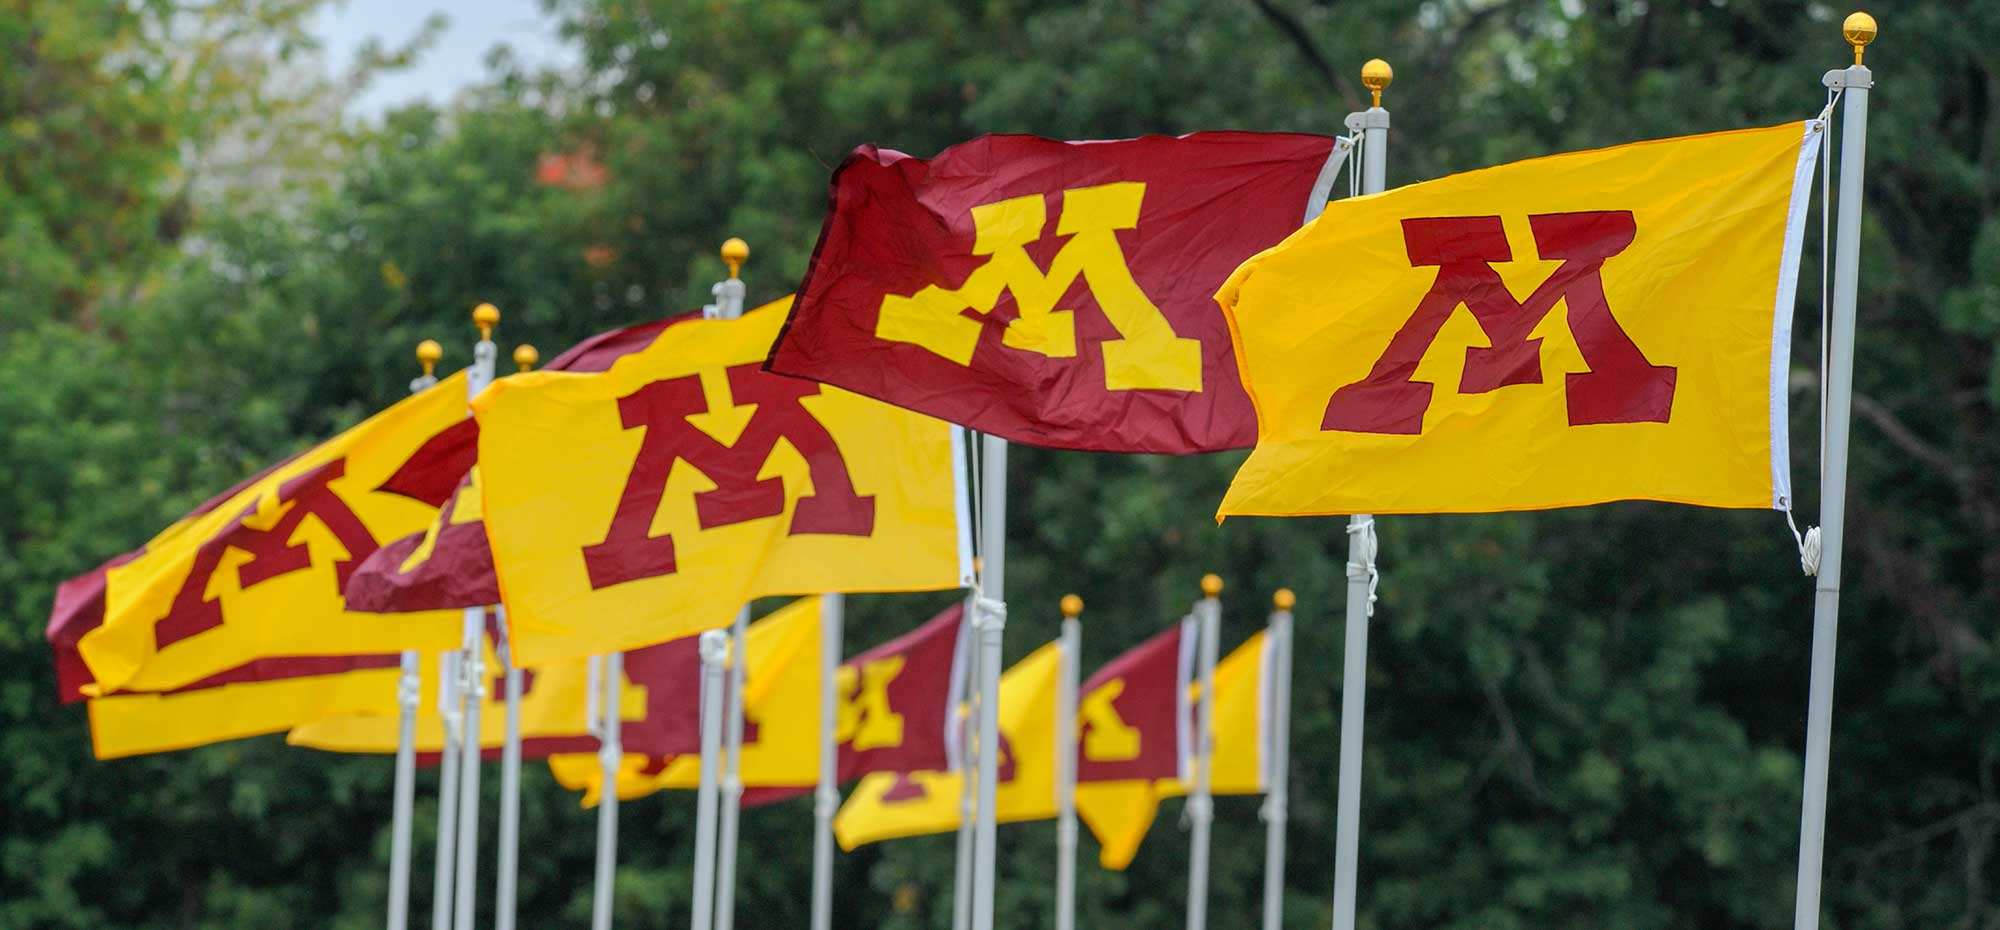 A group of gold and maroon flags with the Minnesota M on them.